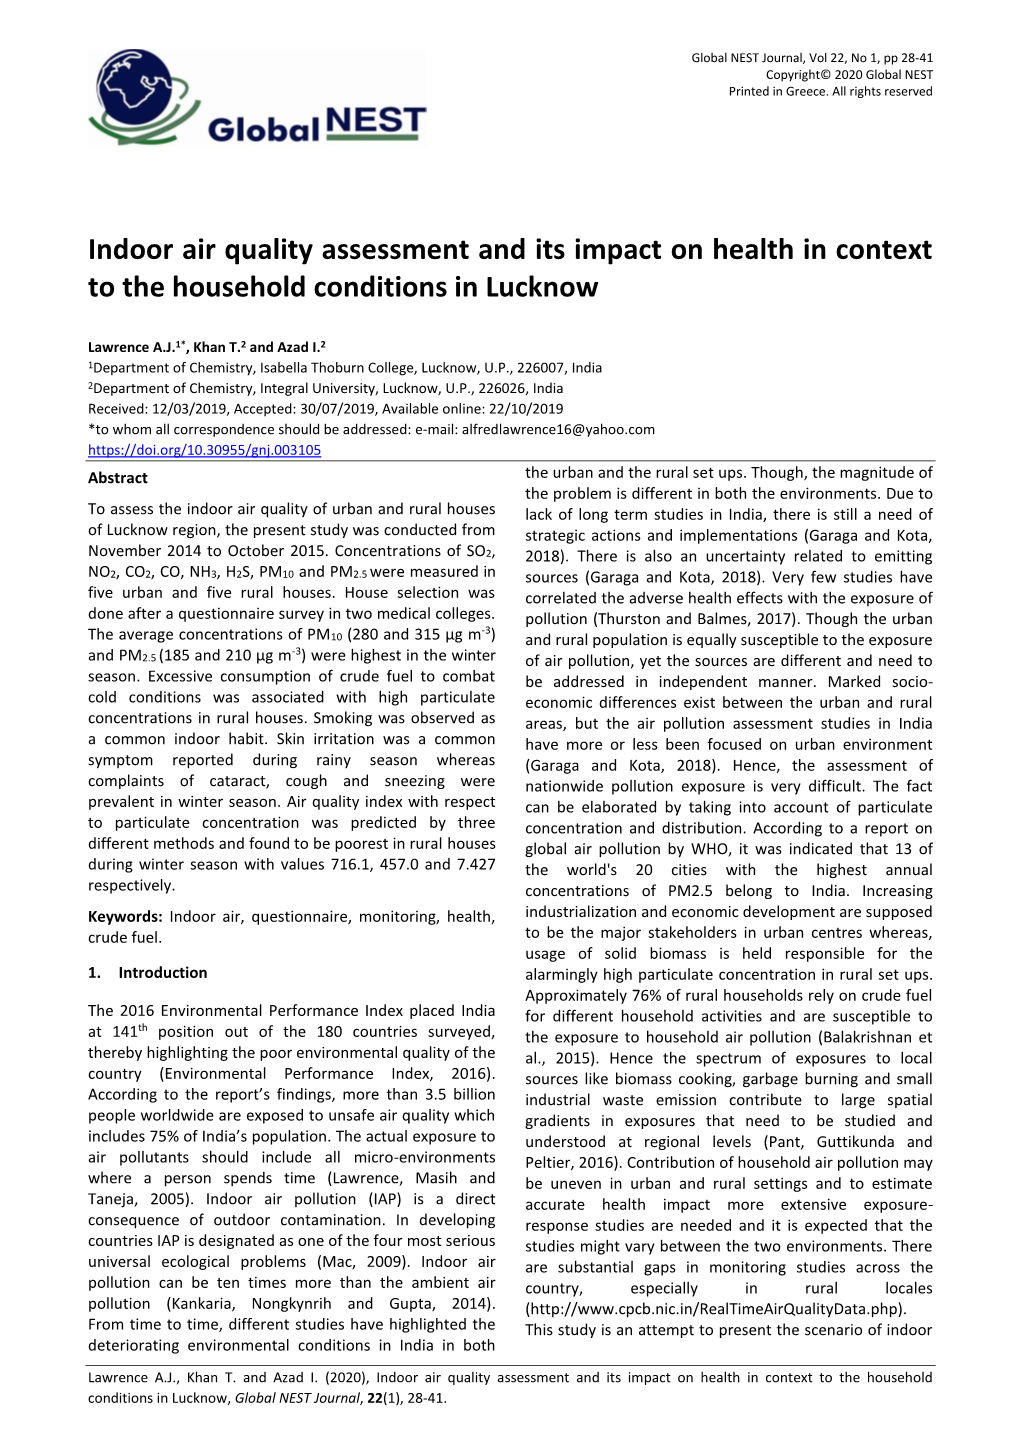 Indoor Air Quality Assessment and Its Impact on Health in Context to the Household Conditions in Lucknow